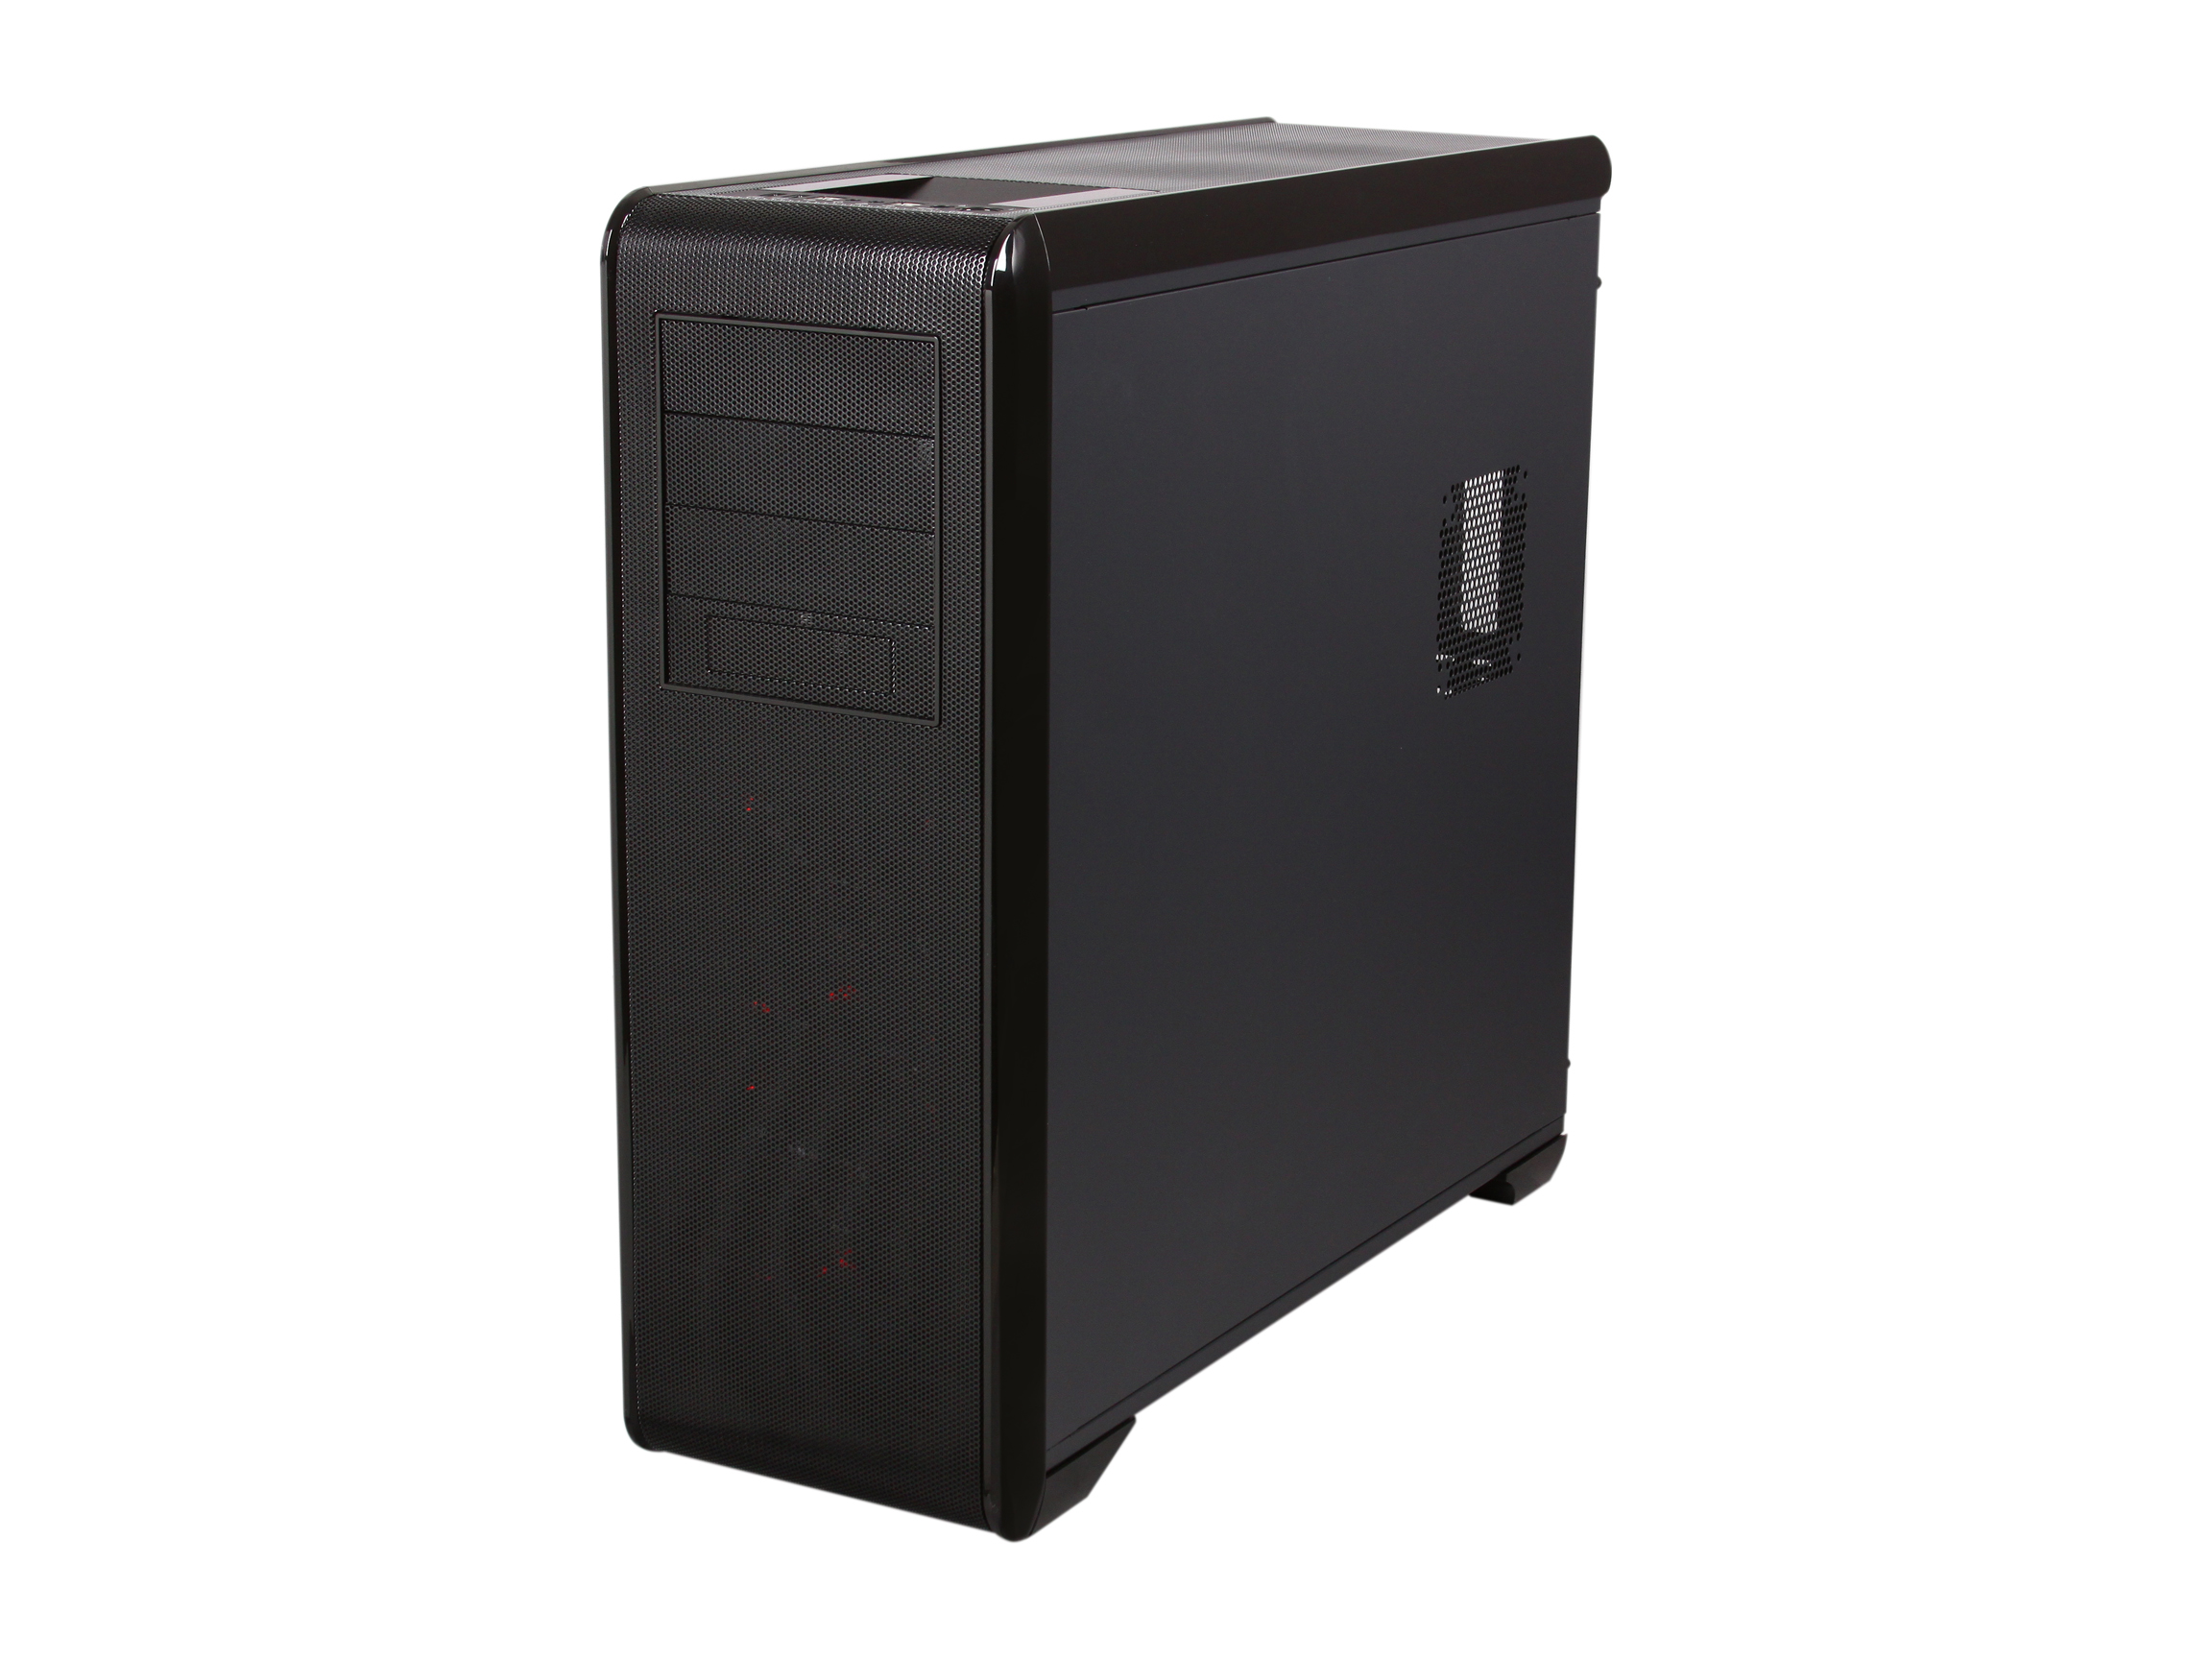 Rosewill Blackhawk Ultra Gaming Super Tower Computer Case Includes 8 Fans